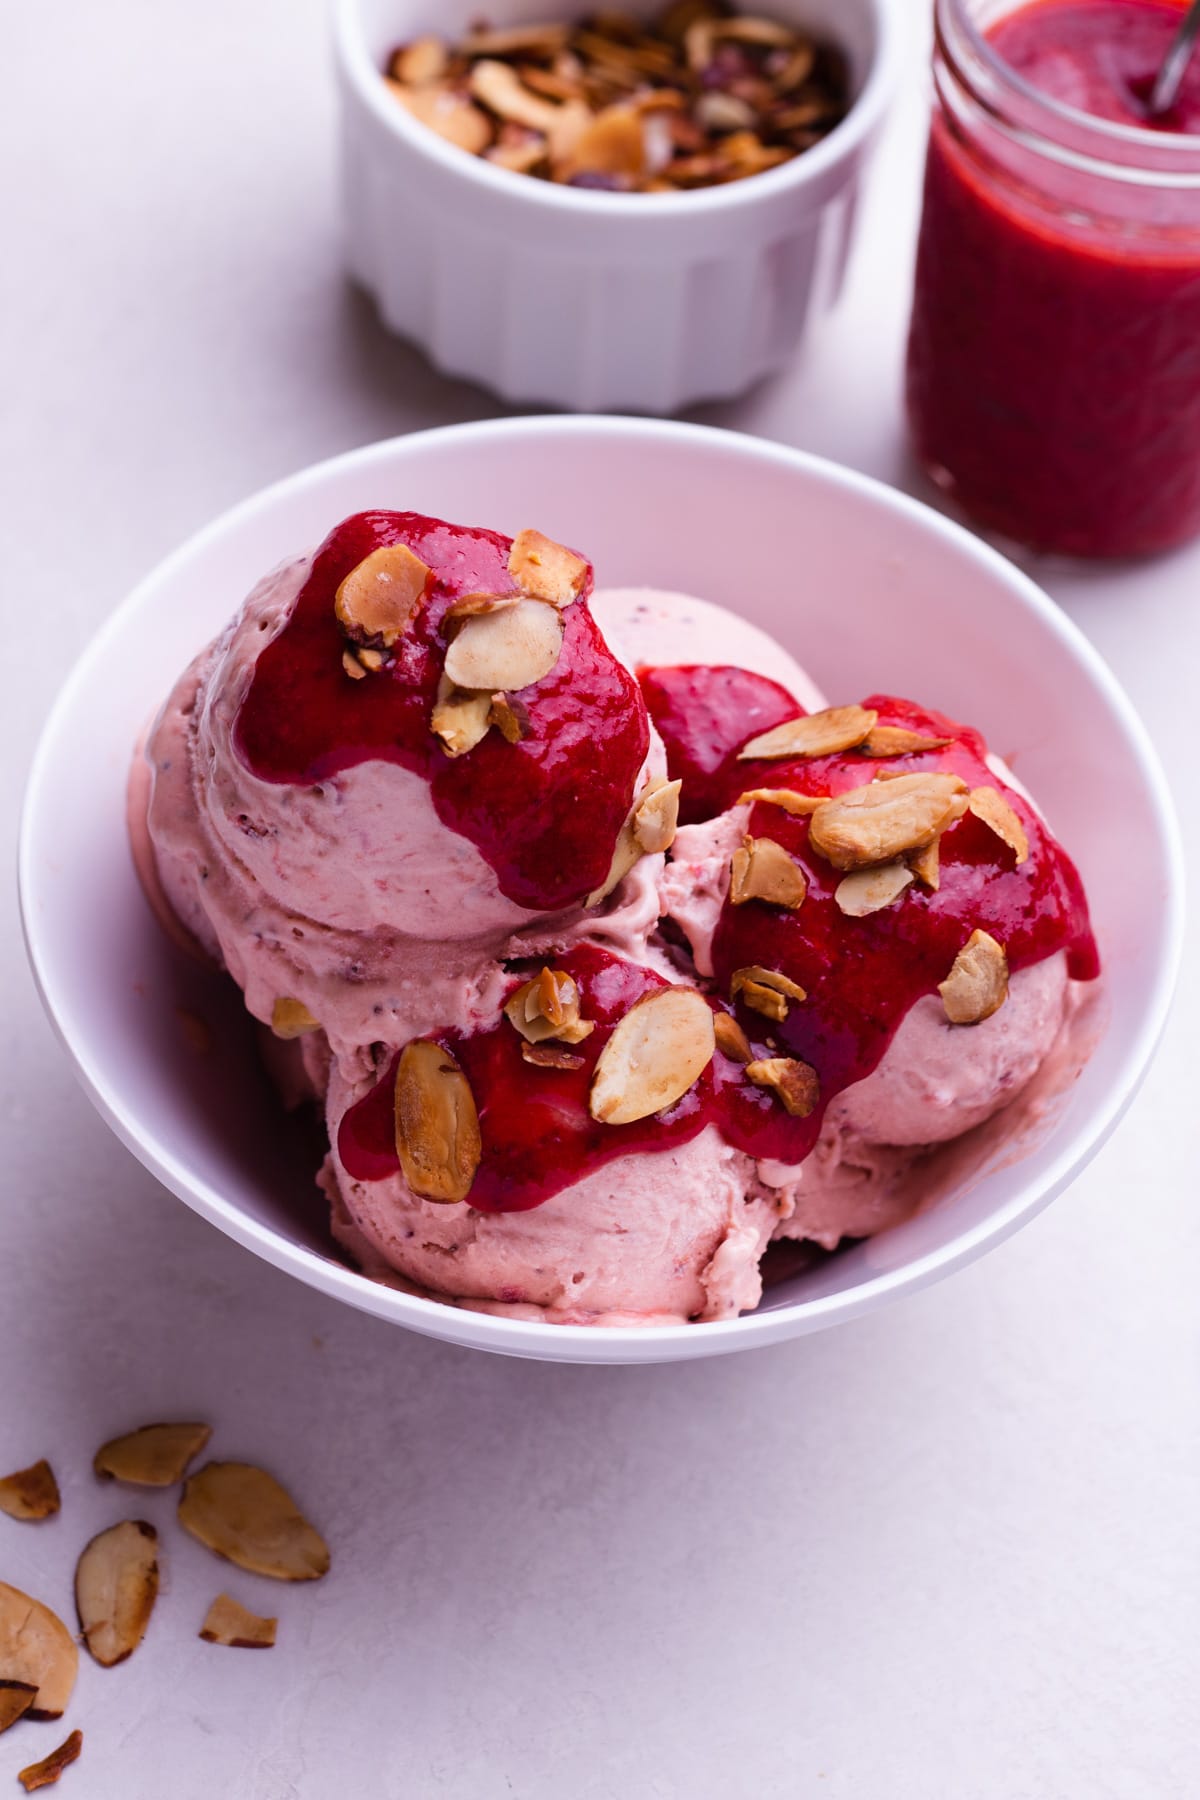 Strawberry Balsamic Ice Cream in a bowl topped with strawberry sauce and toasted almonds with the toppings in containers on the side.